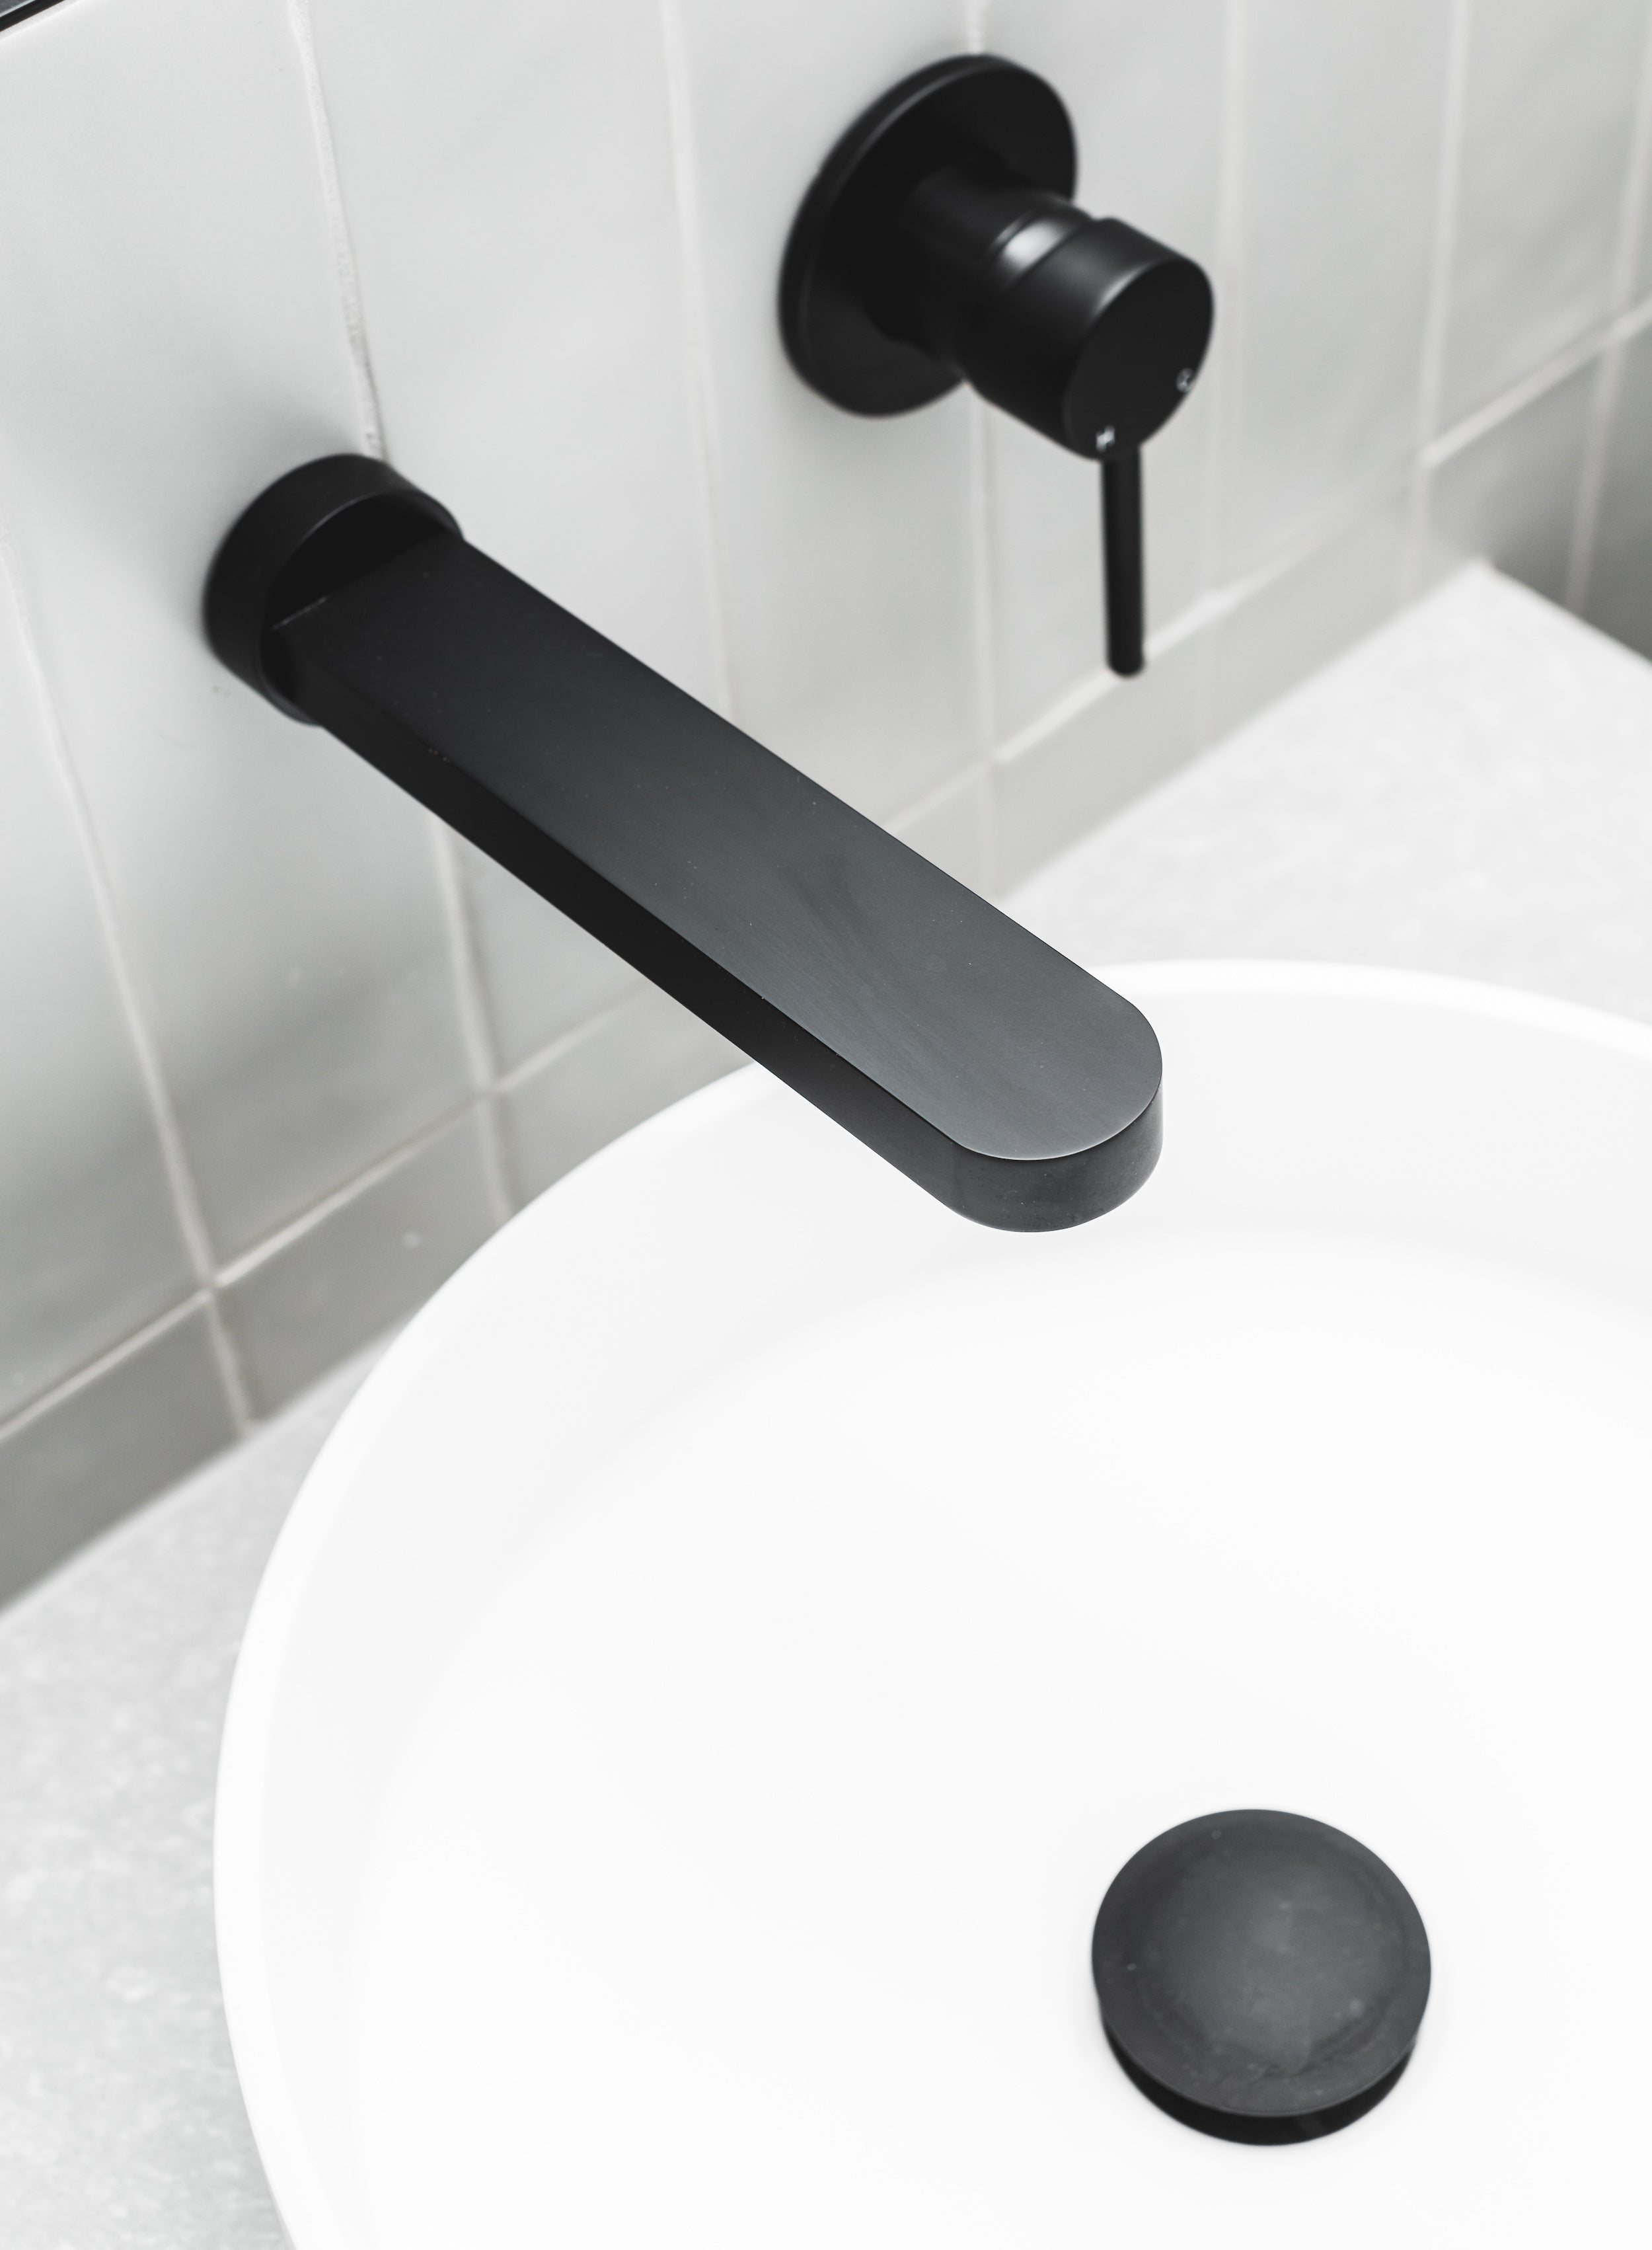 Bathroom basin with Meir black taps and pop up waste